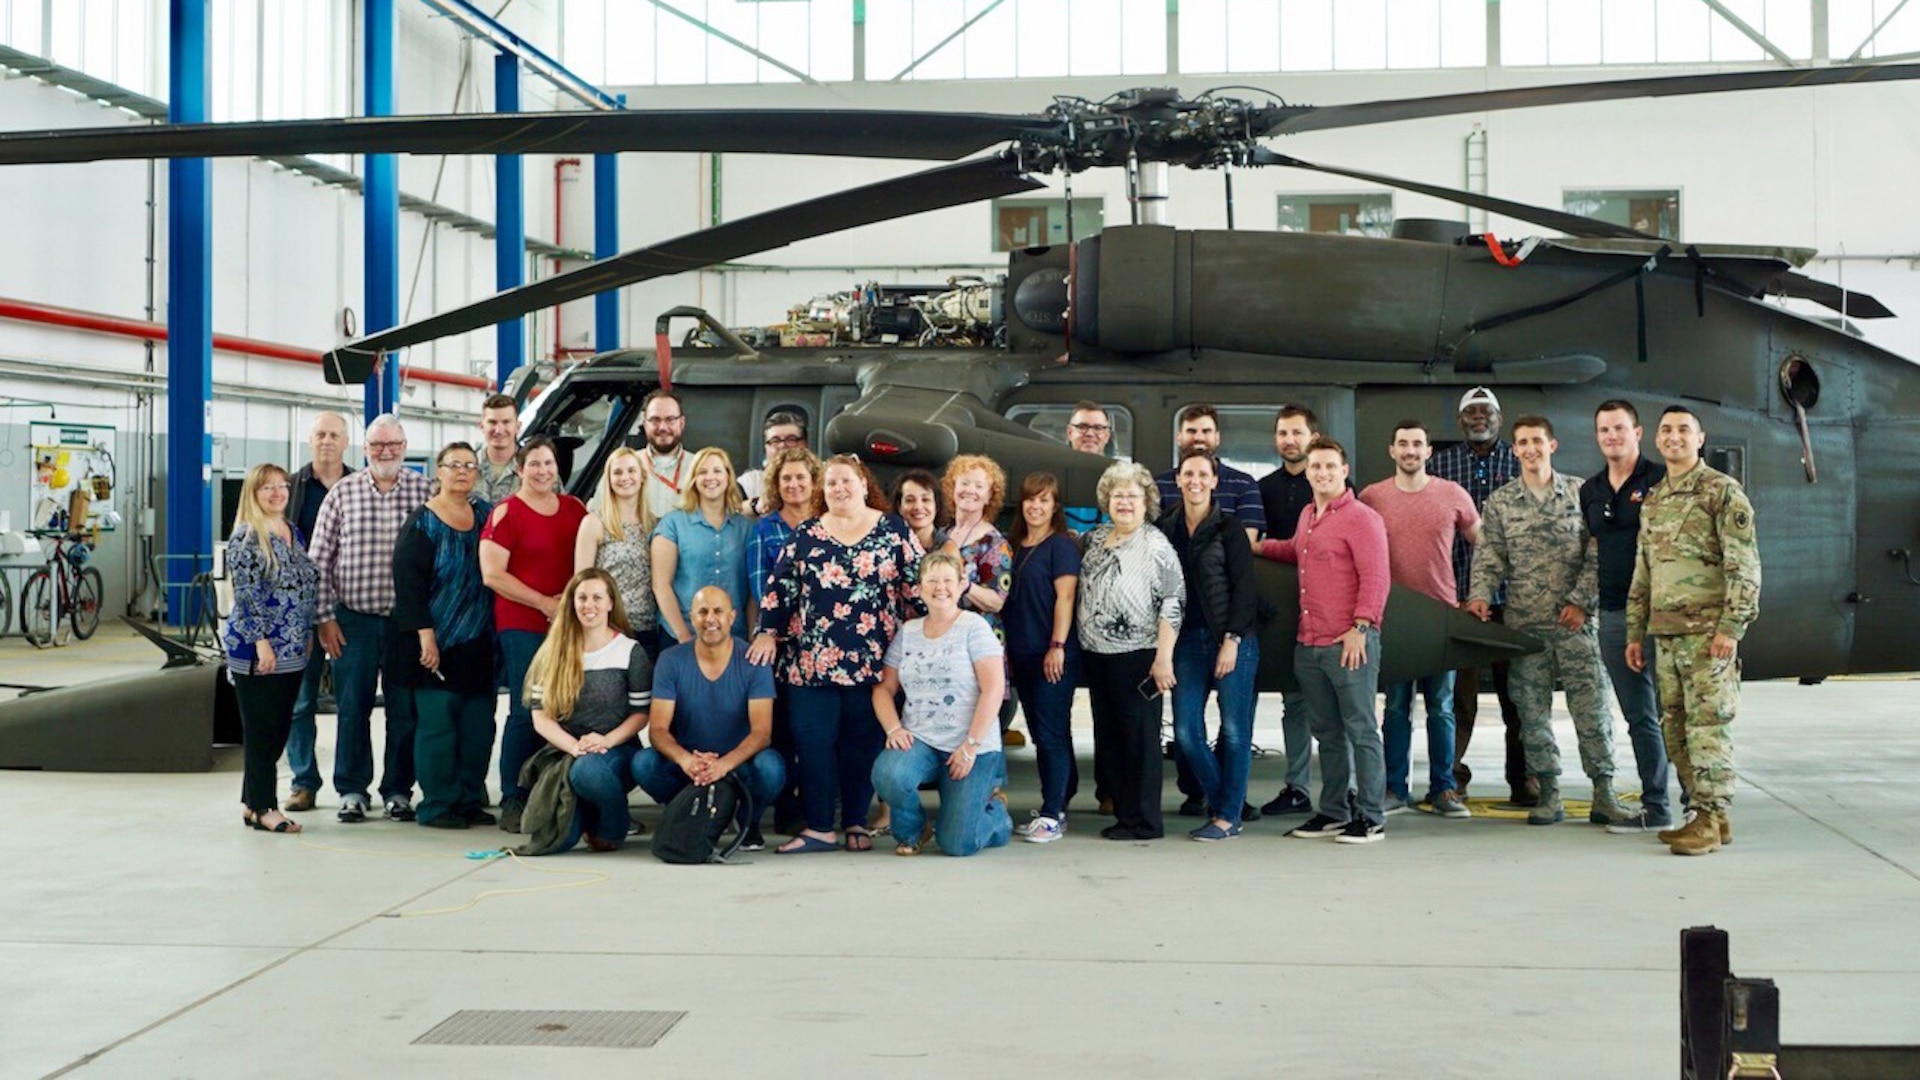 Group of people stand in front of helicopter inside hangar.